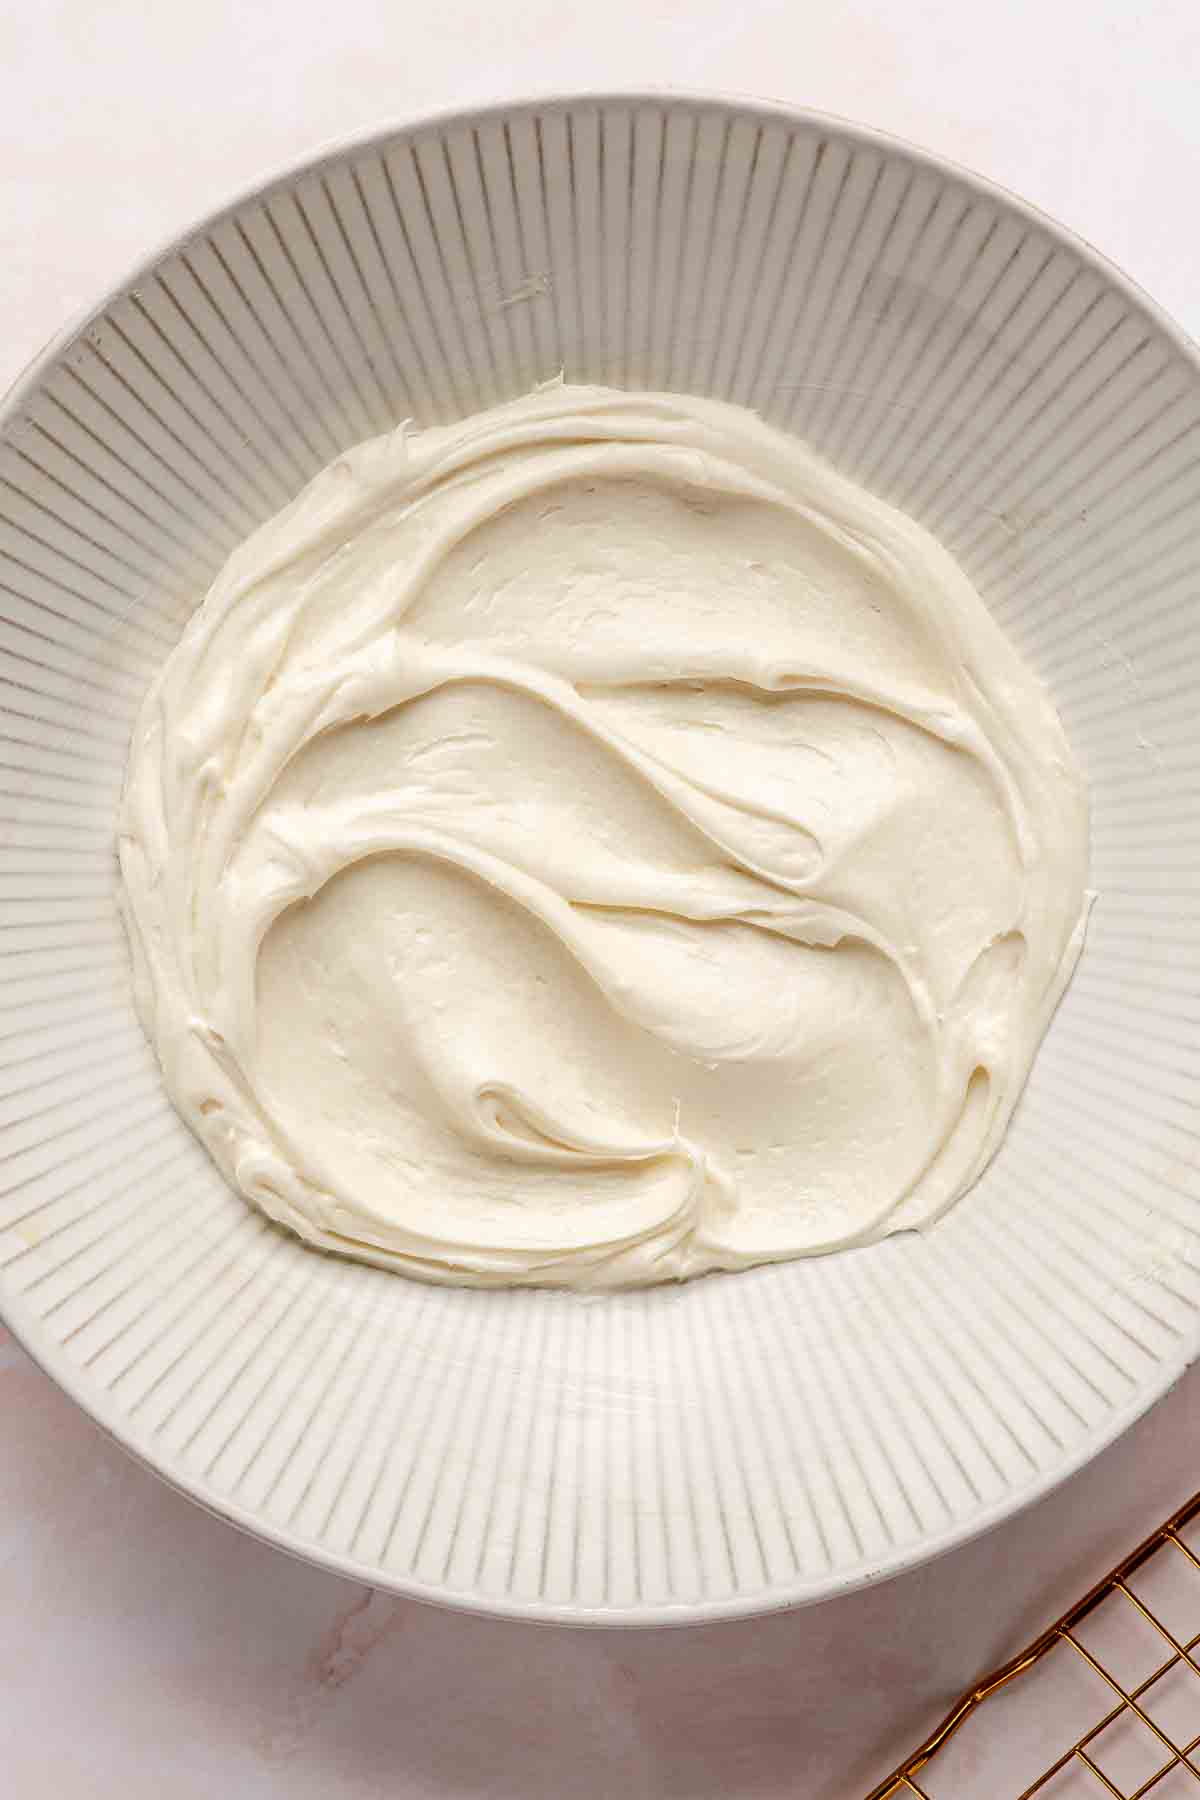 Smooth cream cheese frosting in a bowl.